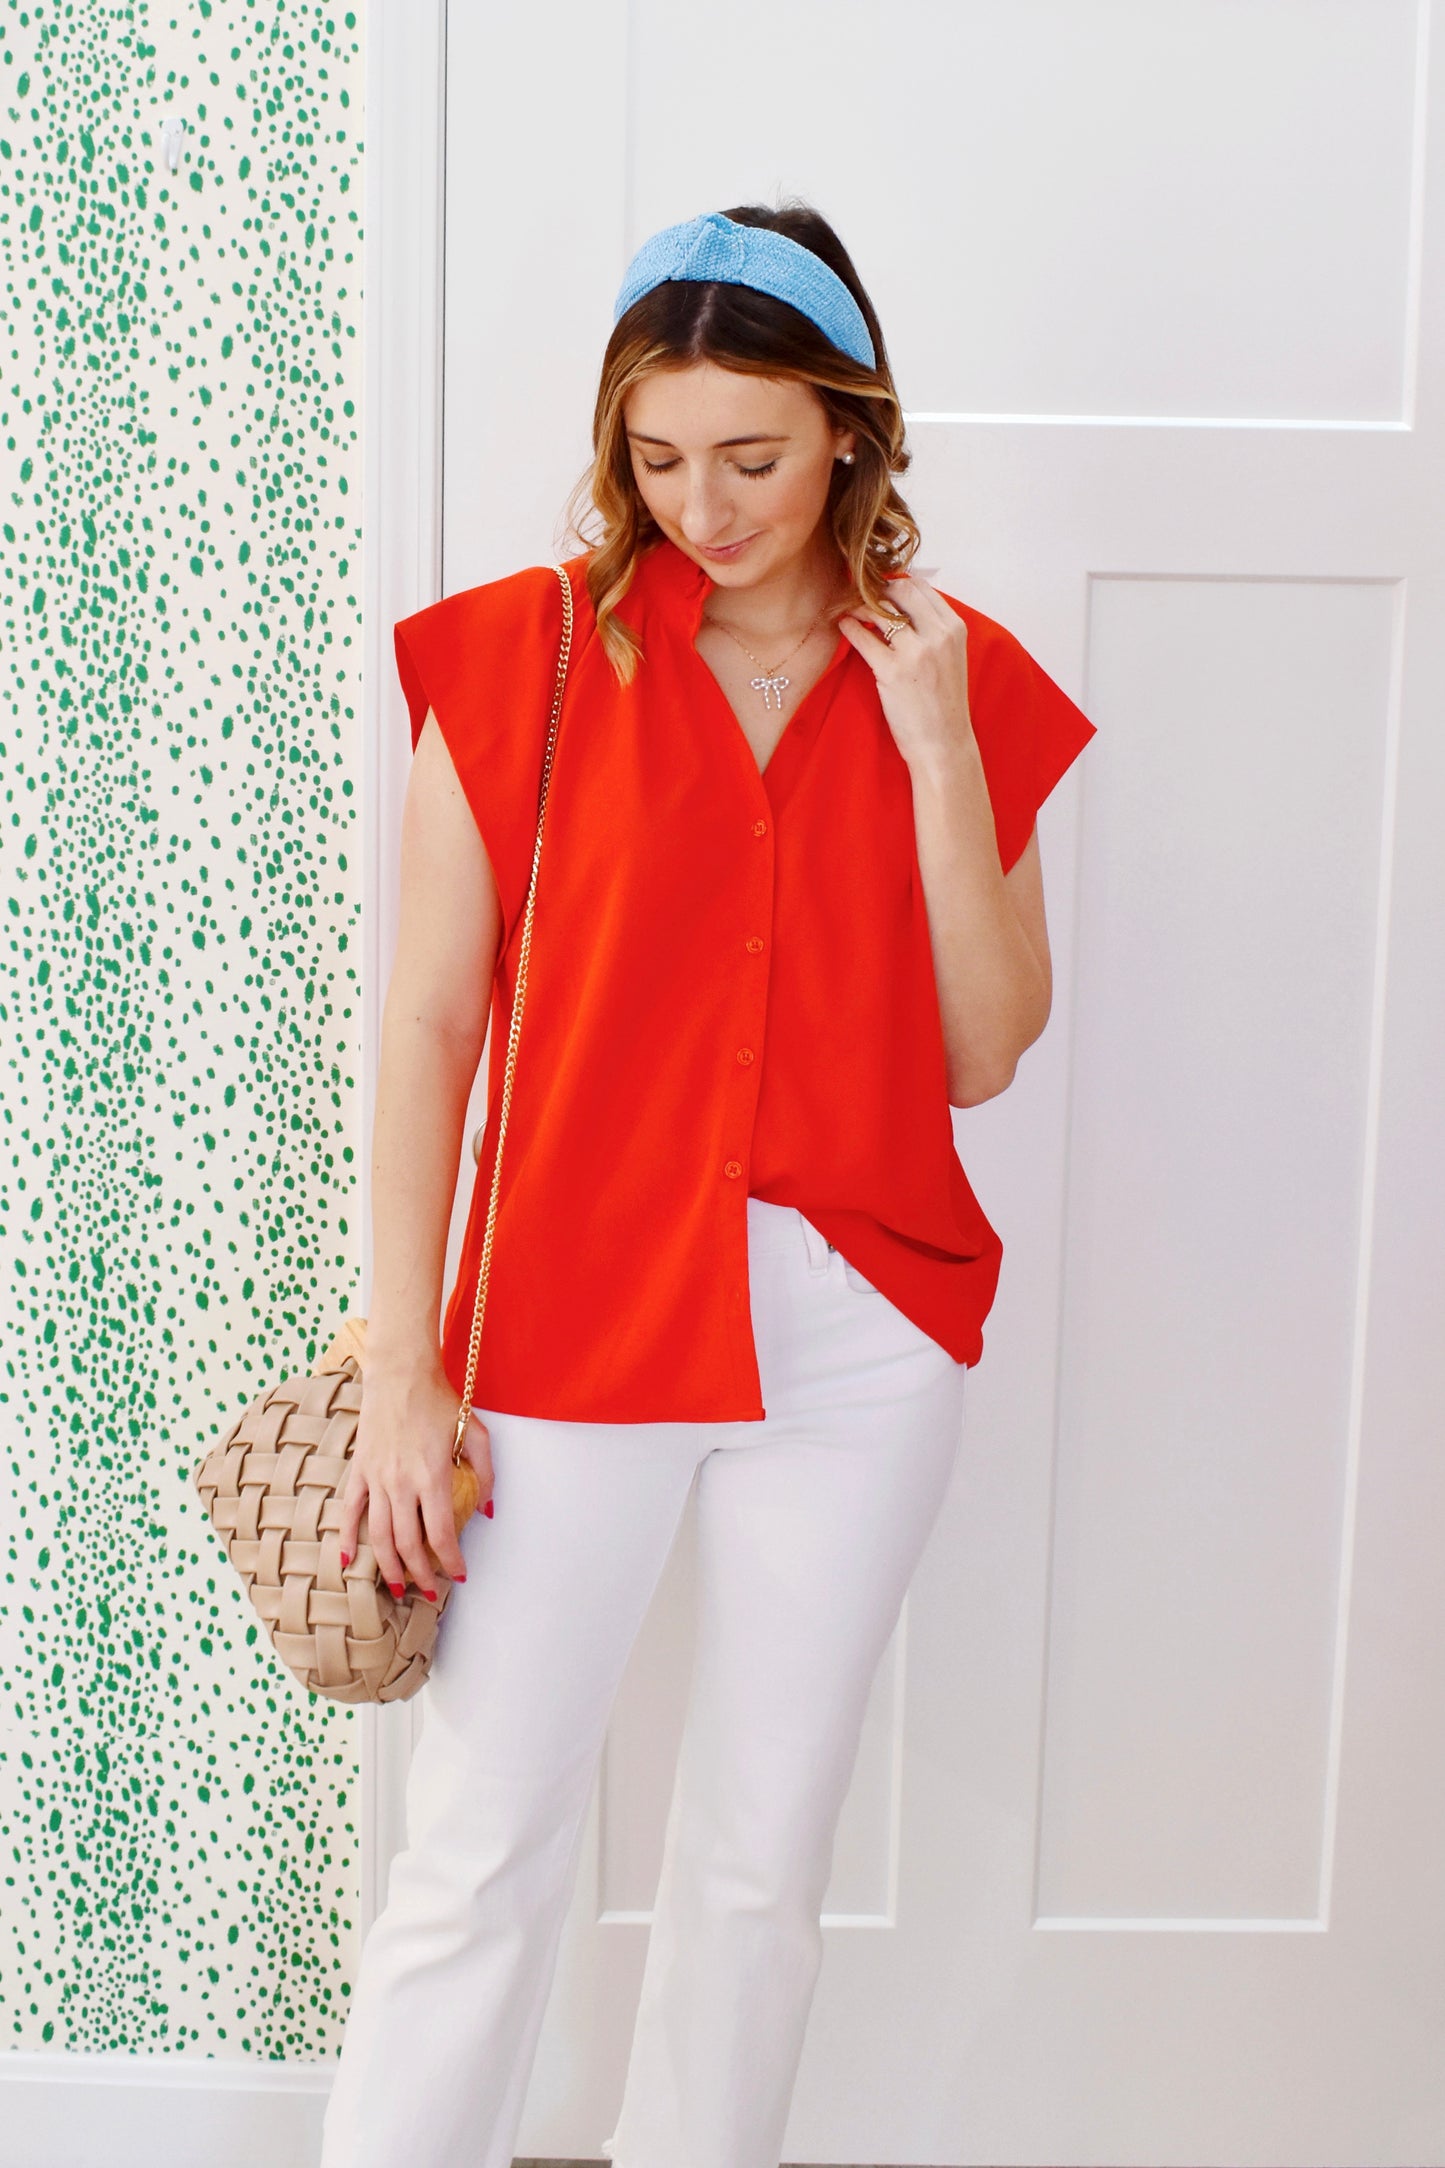 Red Frill Neck Button Down Top